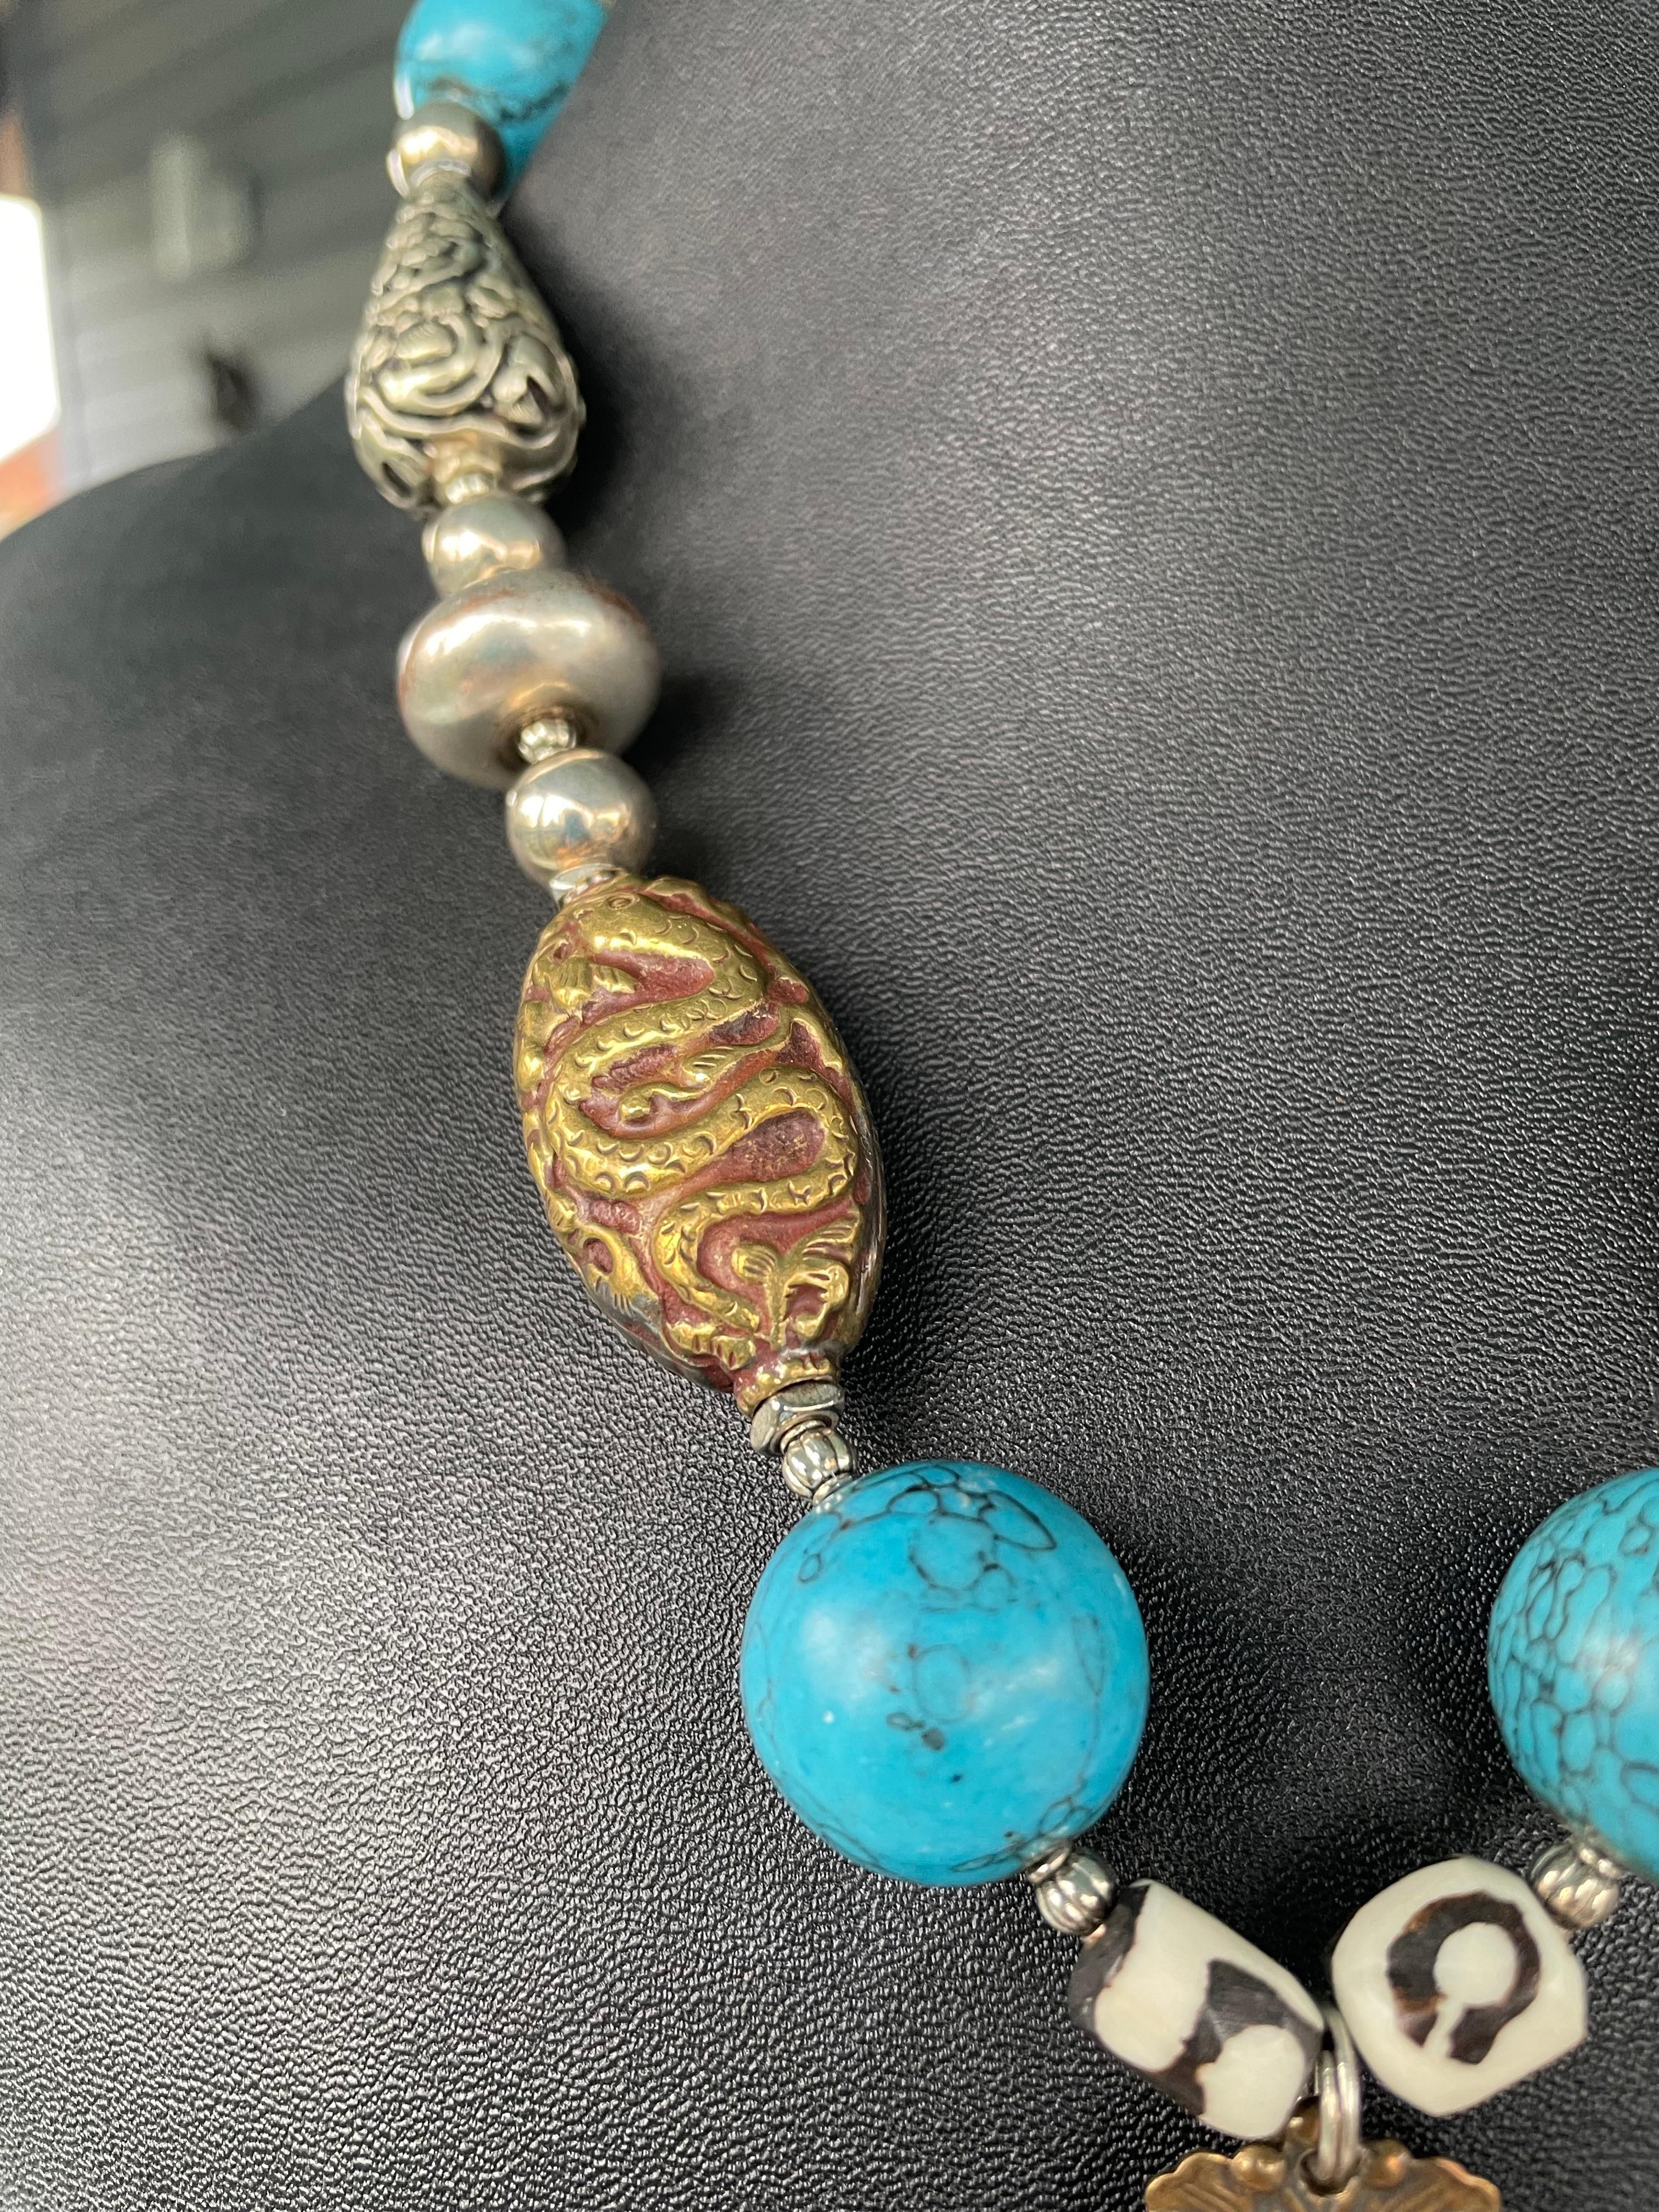 One of a kind ,handmade,statement necklace with sterling,vintage elephant brooch pendant on a string of turquoise,Tibetan brass and silver repousse beads. Sterling silver Mexican rondelles and African mud beads are included.